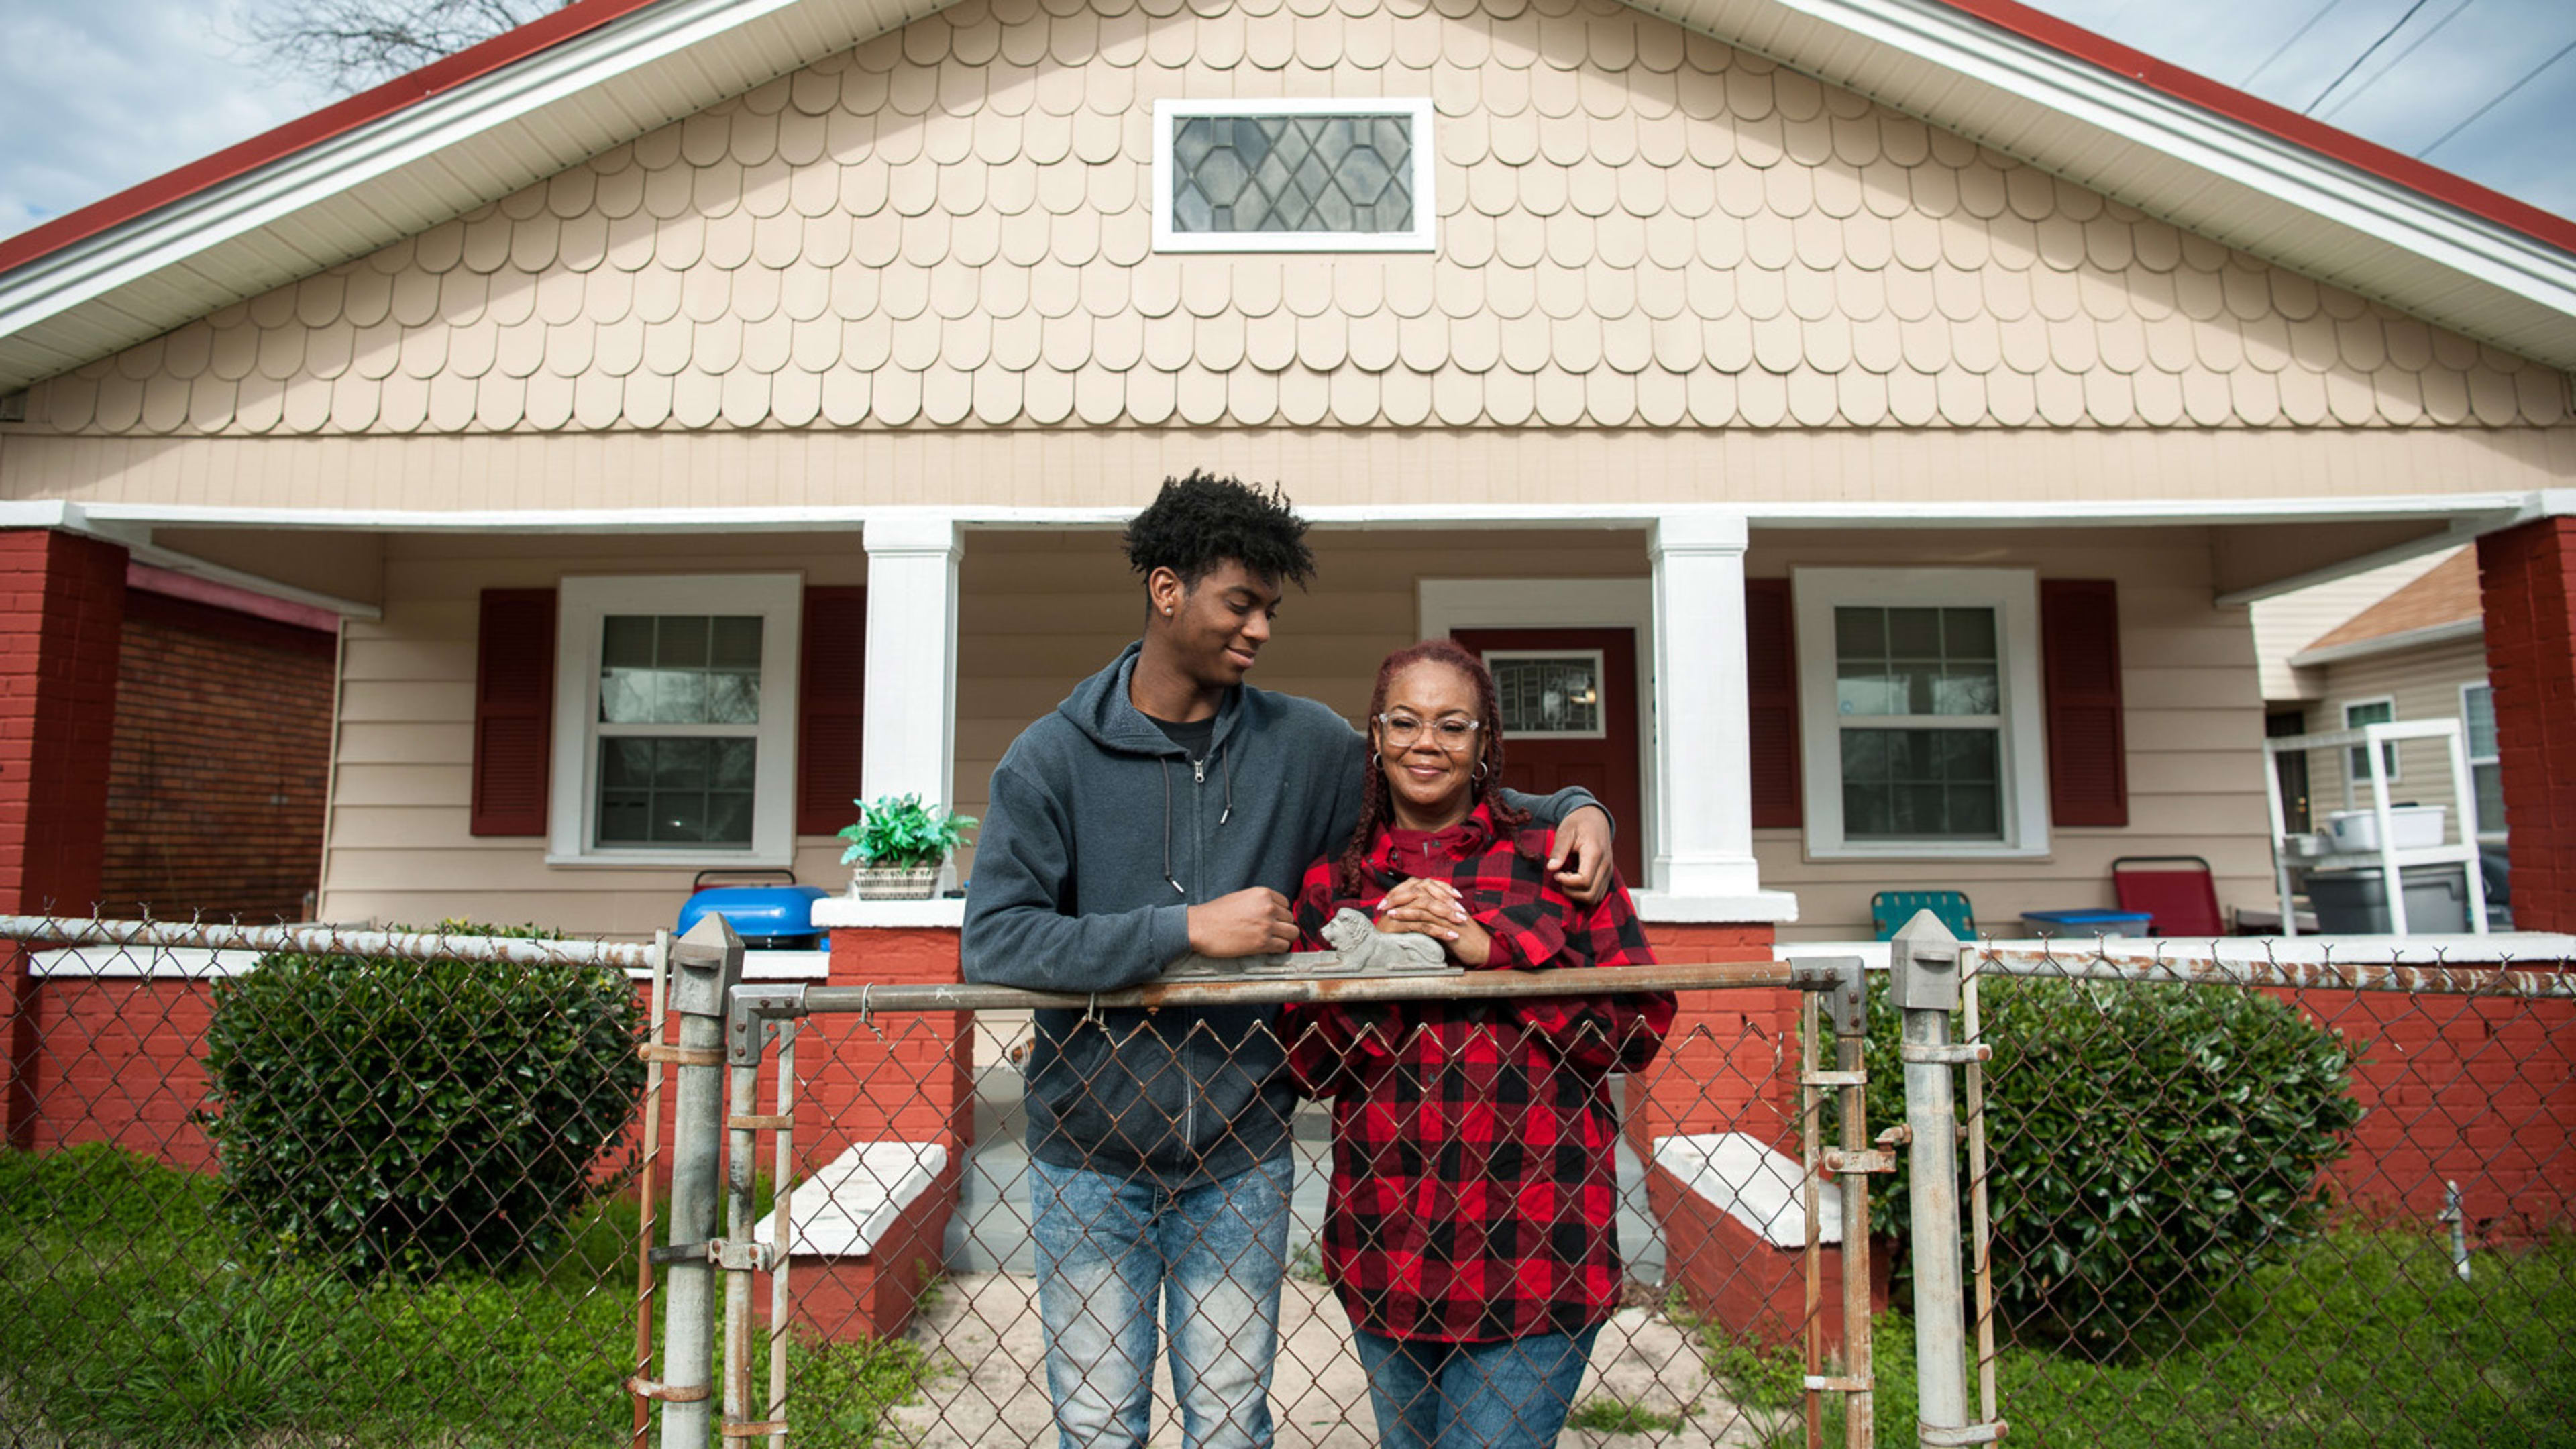 This school teaches low-income students to renovate houses—and helps them become homeowners